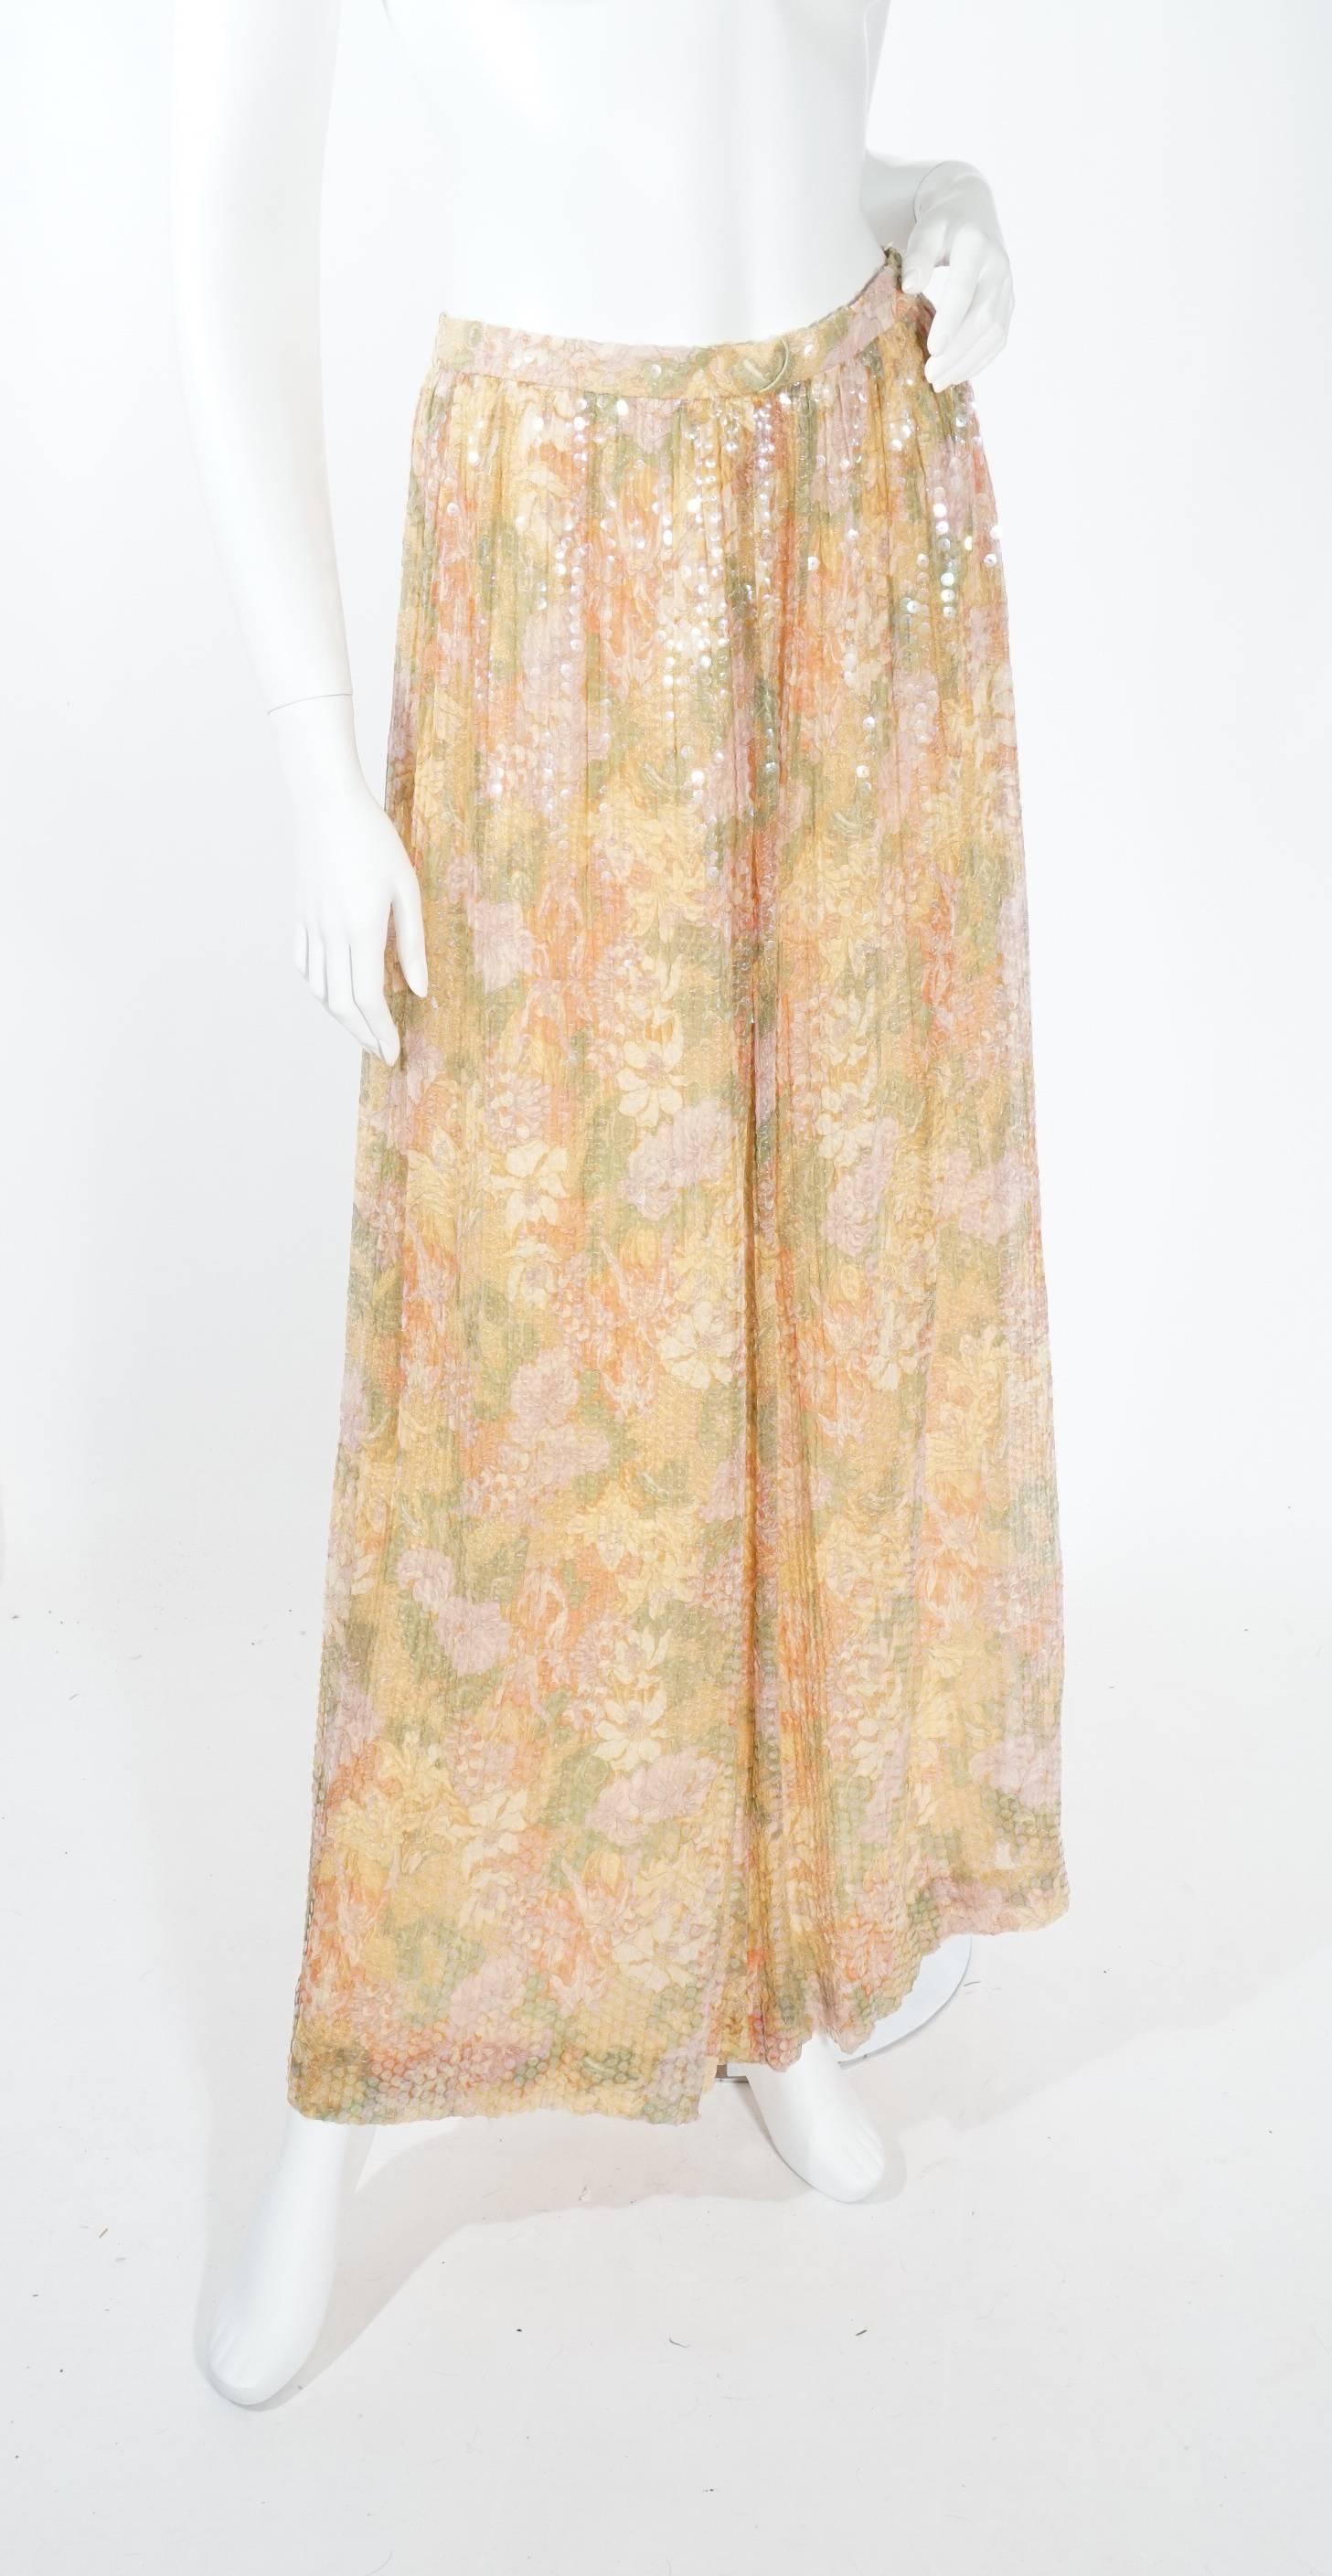 Vintage 1970s Adele Simpson long skirt. This skirt features fully adorned sequins and a gorgeous floral pastel colored print. This skirt is is easily dressed up and down for spring and summer. Fully lined, zip back. Excellent condition.